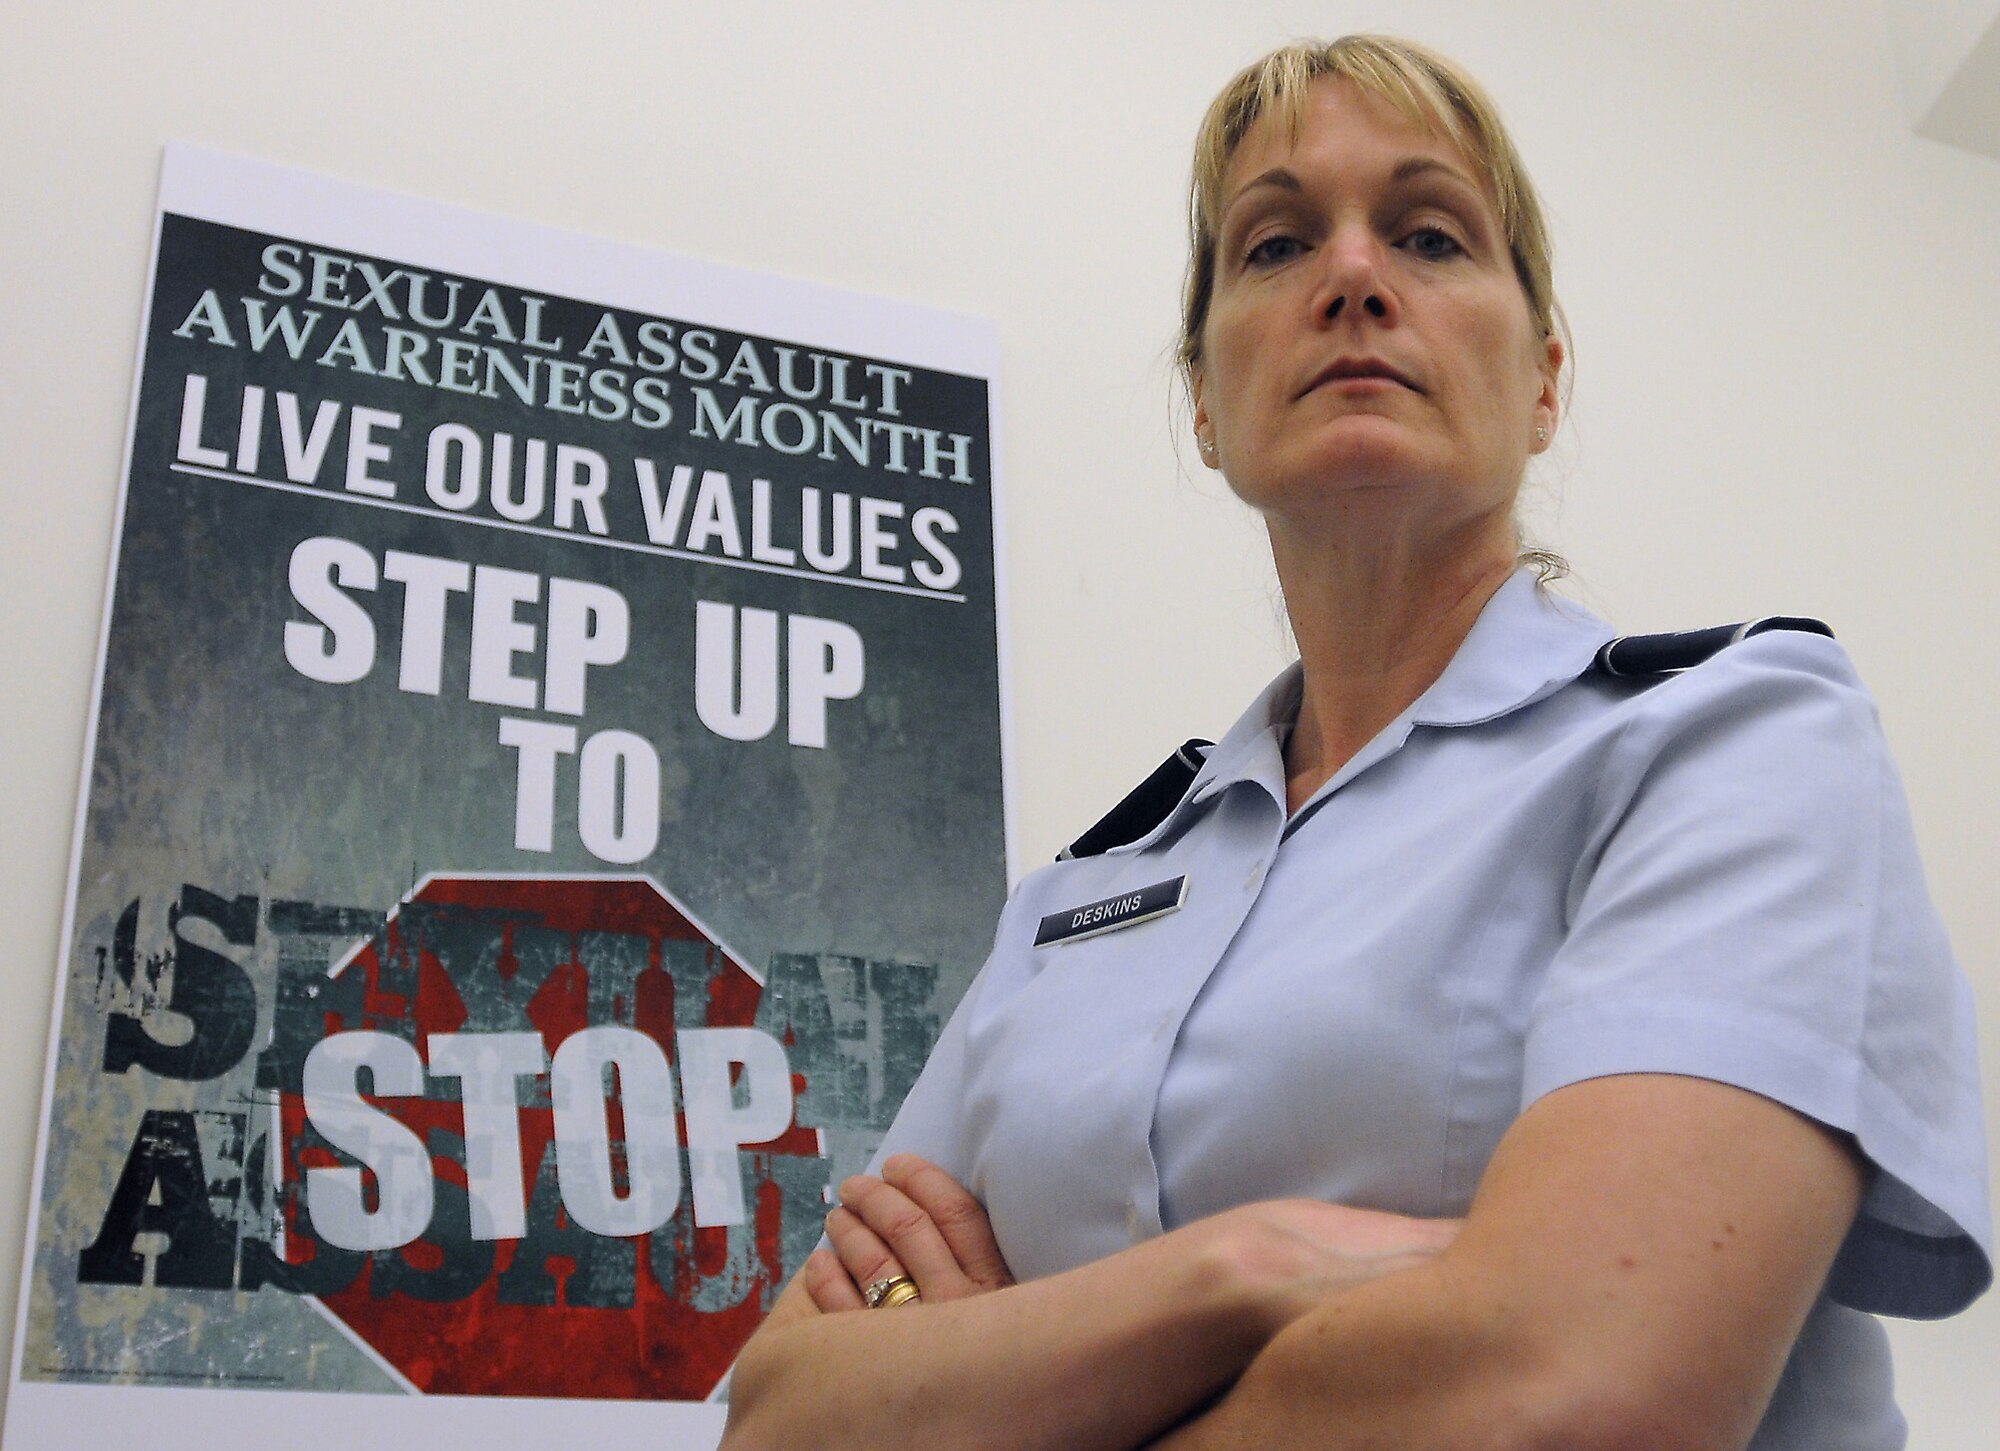 U.S. Air Force Brig. Gen. Dawne Deskins spearheads the Air Force National Guard's Sexual Assault Prevention and Response program for the 100,000 Air National Guard members. As the lead role in the program, Deskins will be able to influence the program at a higher level at a time when sexual assault in the military has garnered national attention. (U.S. Army National Guard photo by Staff Sgt. Michelle Gonzalez)